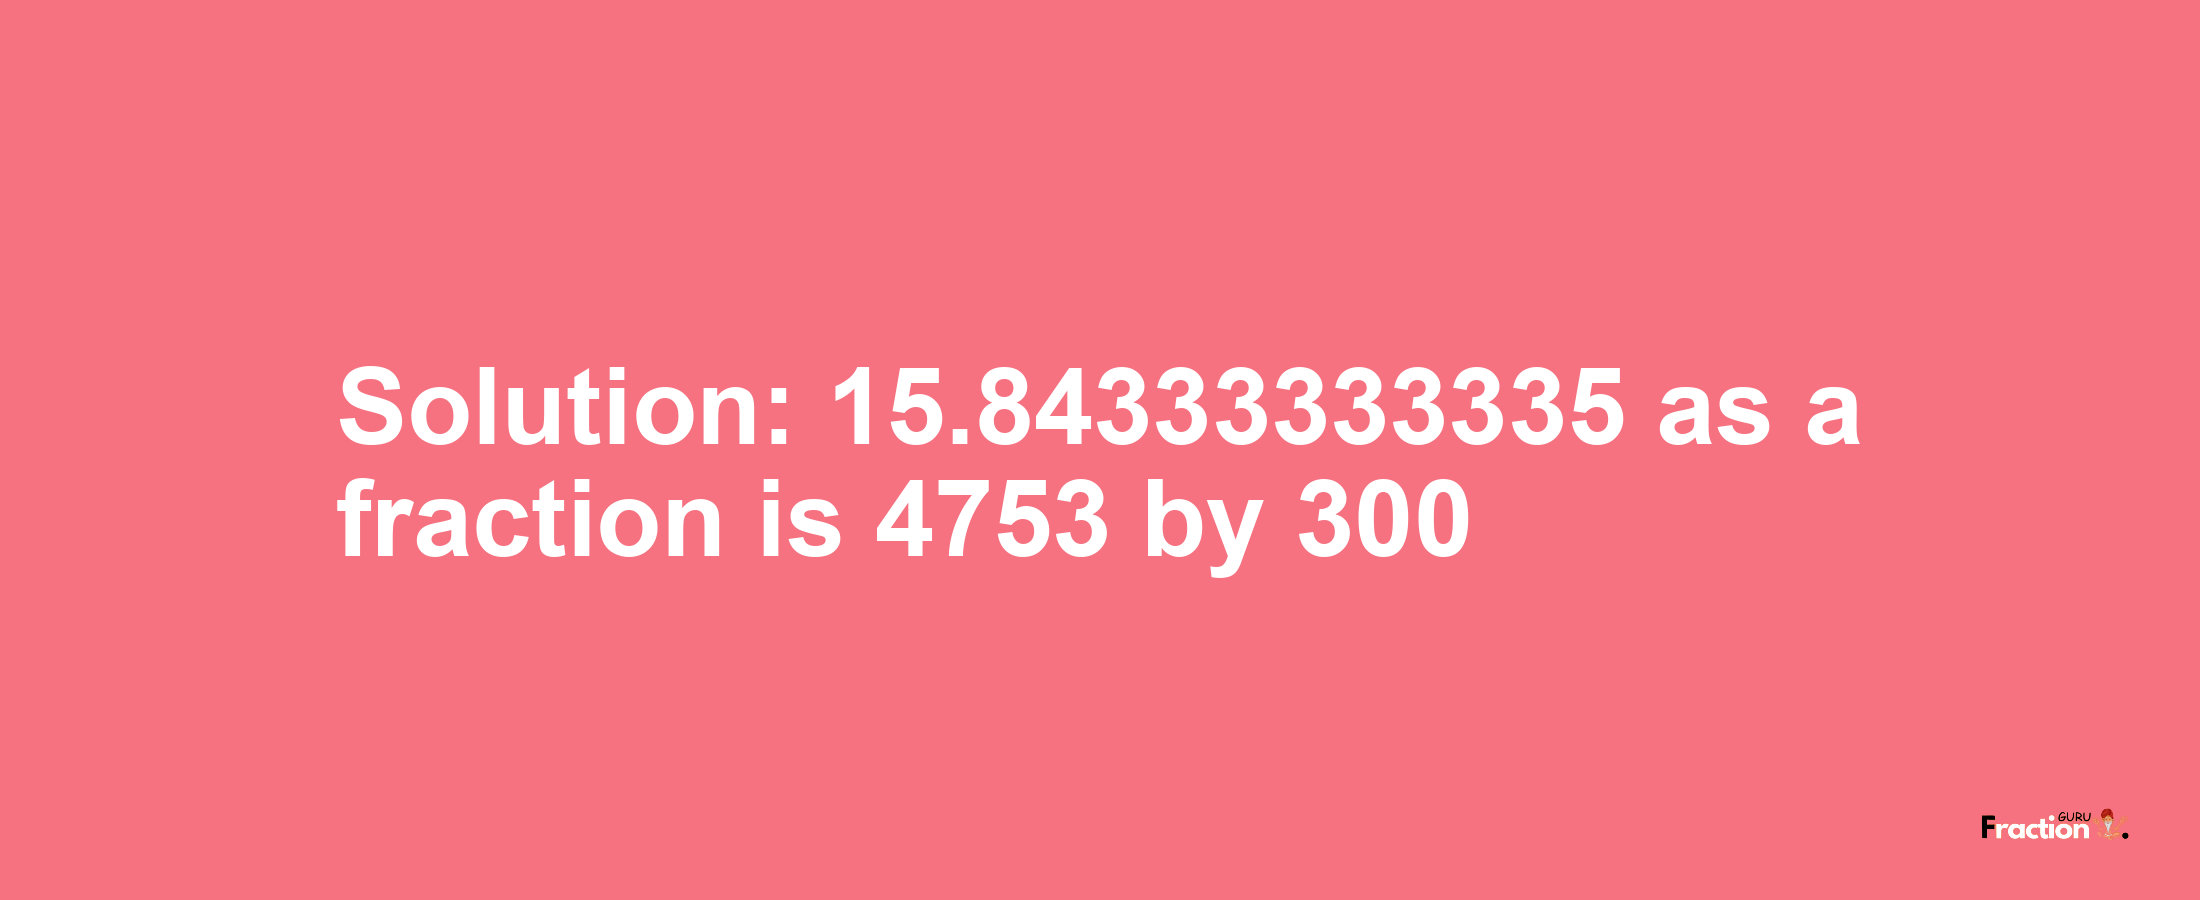 Solution:15.84333333335 as a fraction is 4753/300